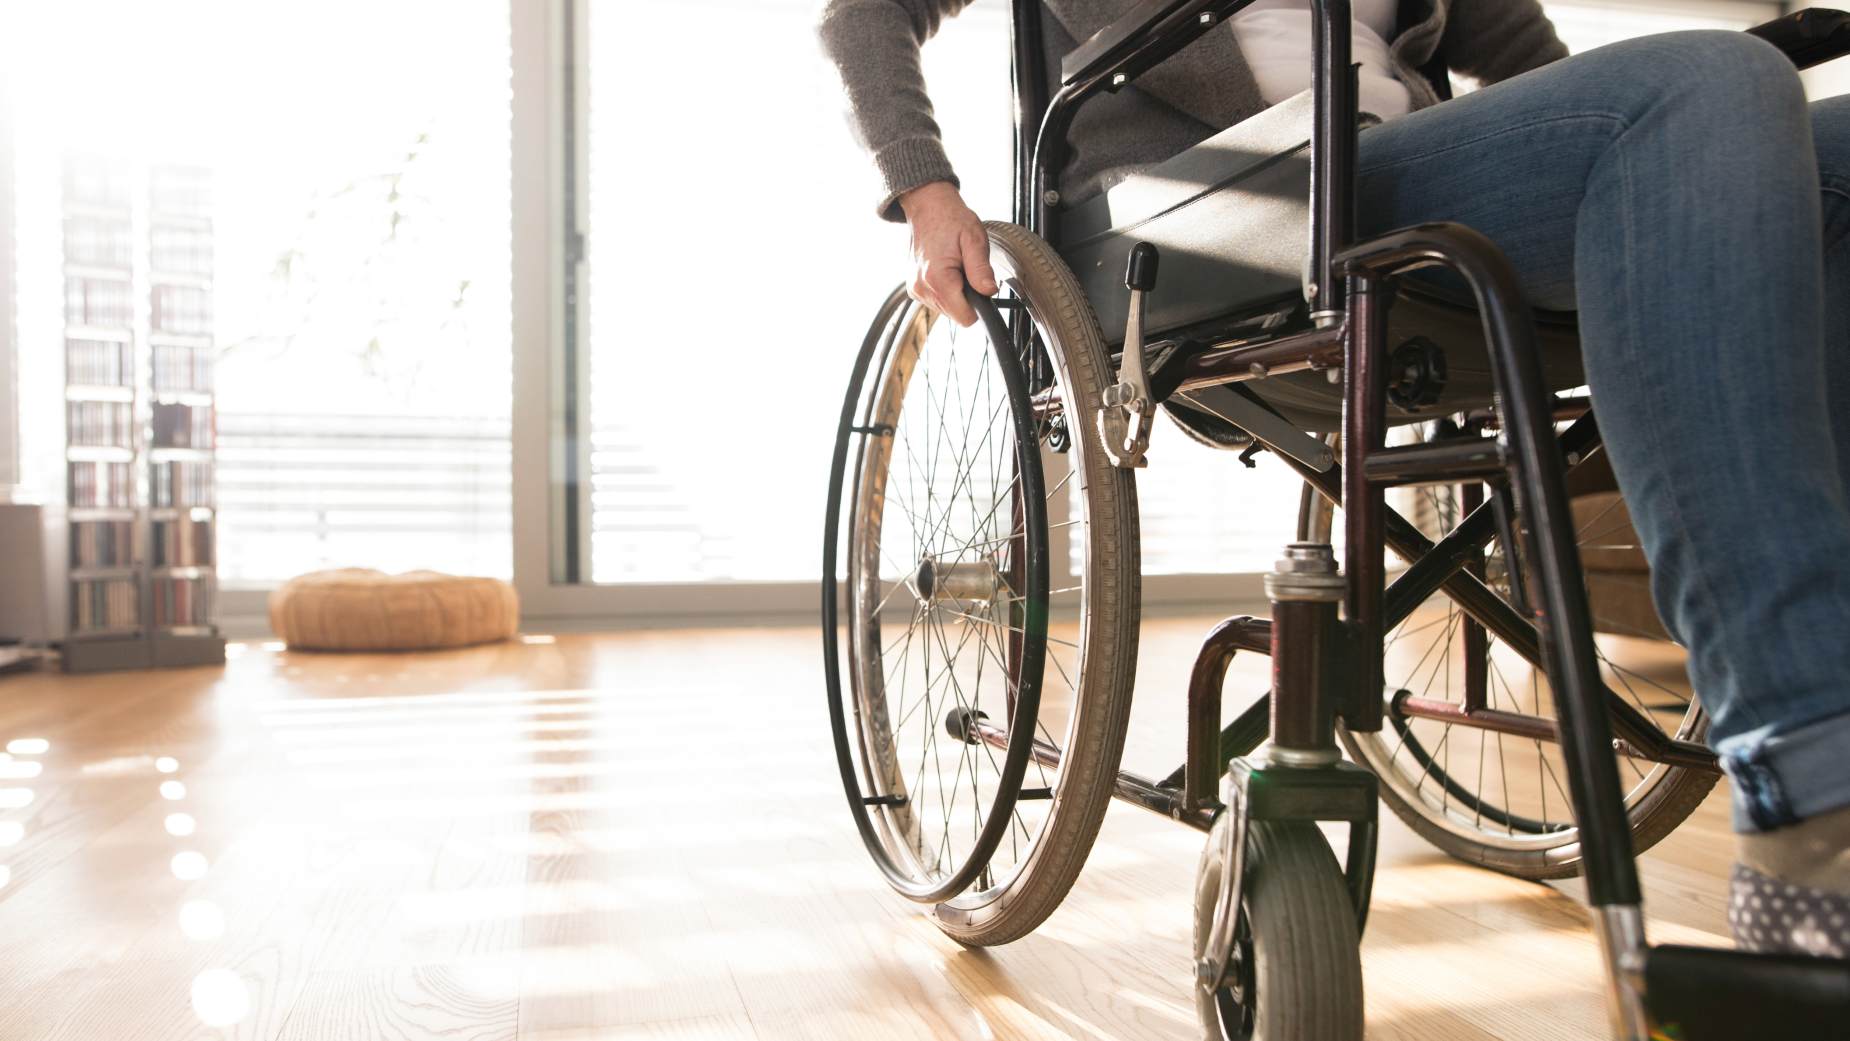 The 5-Year Rule for Social Security Disability: What It Means and Why It's Important